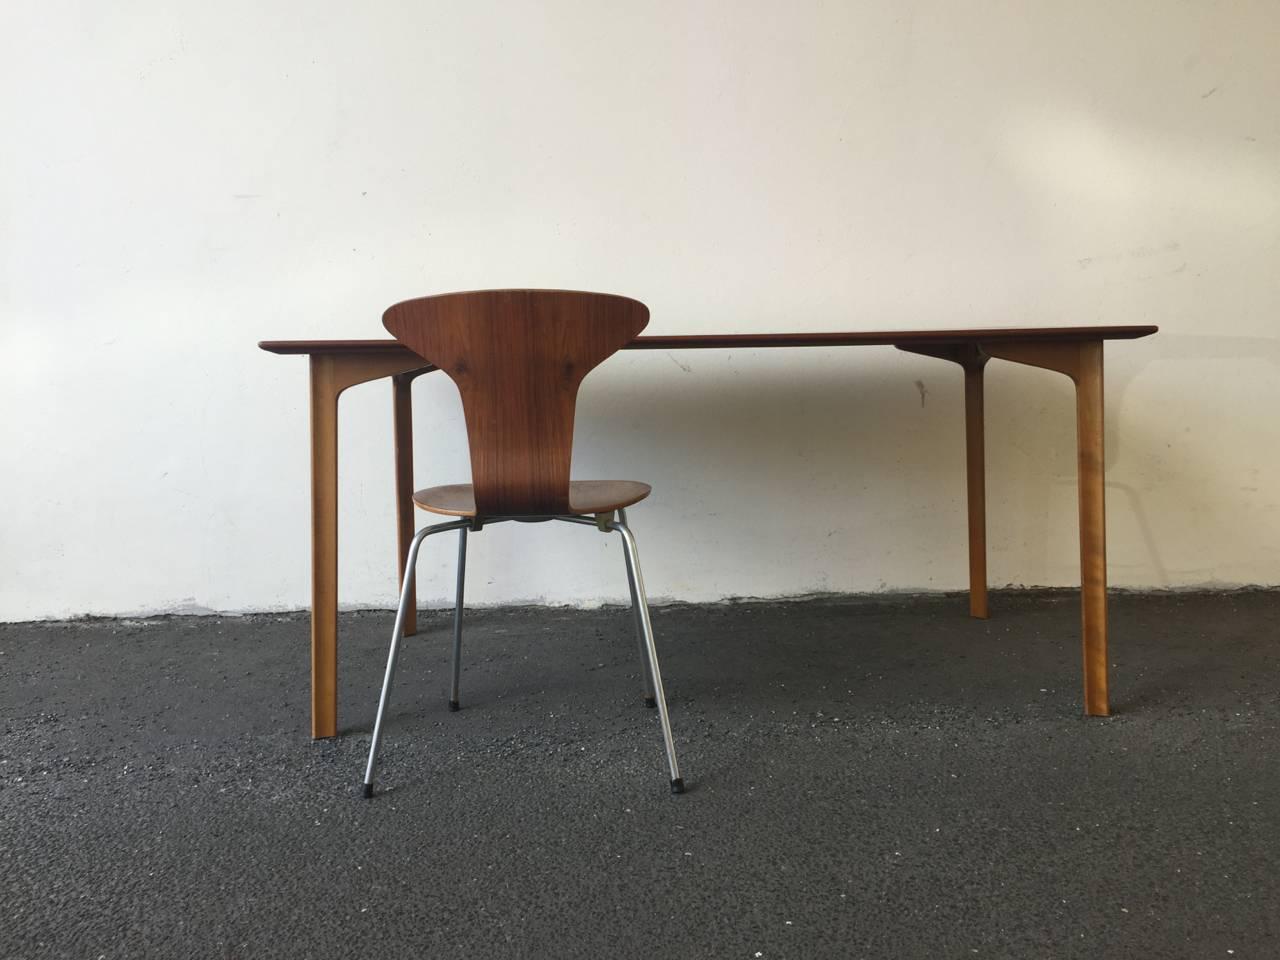 Grand prix teak dining table designed by Arne Jacobsen in 1957. Perfect untouched condition.